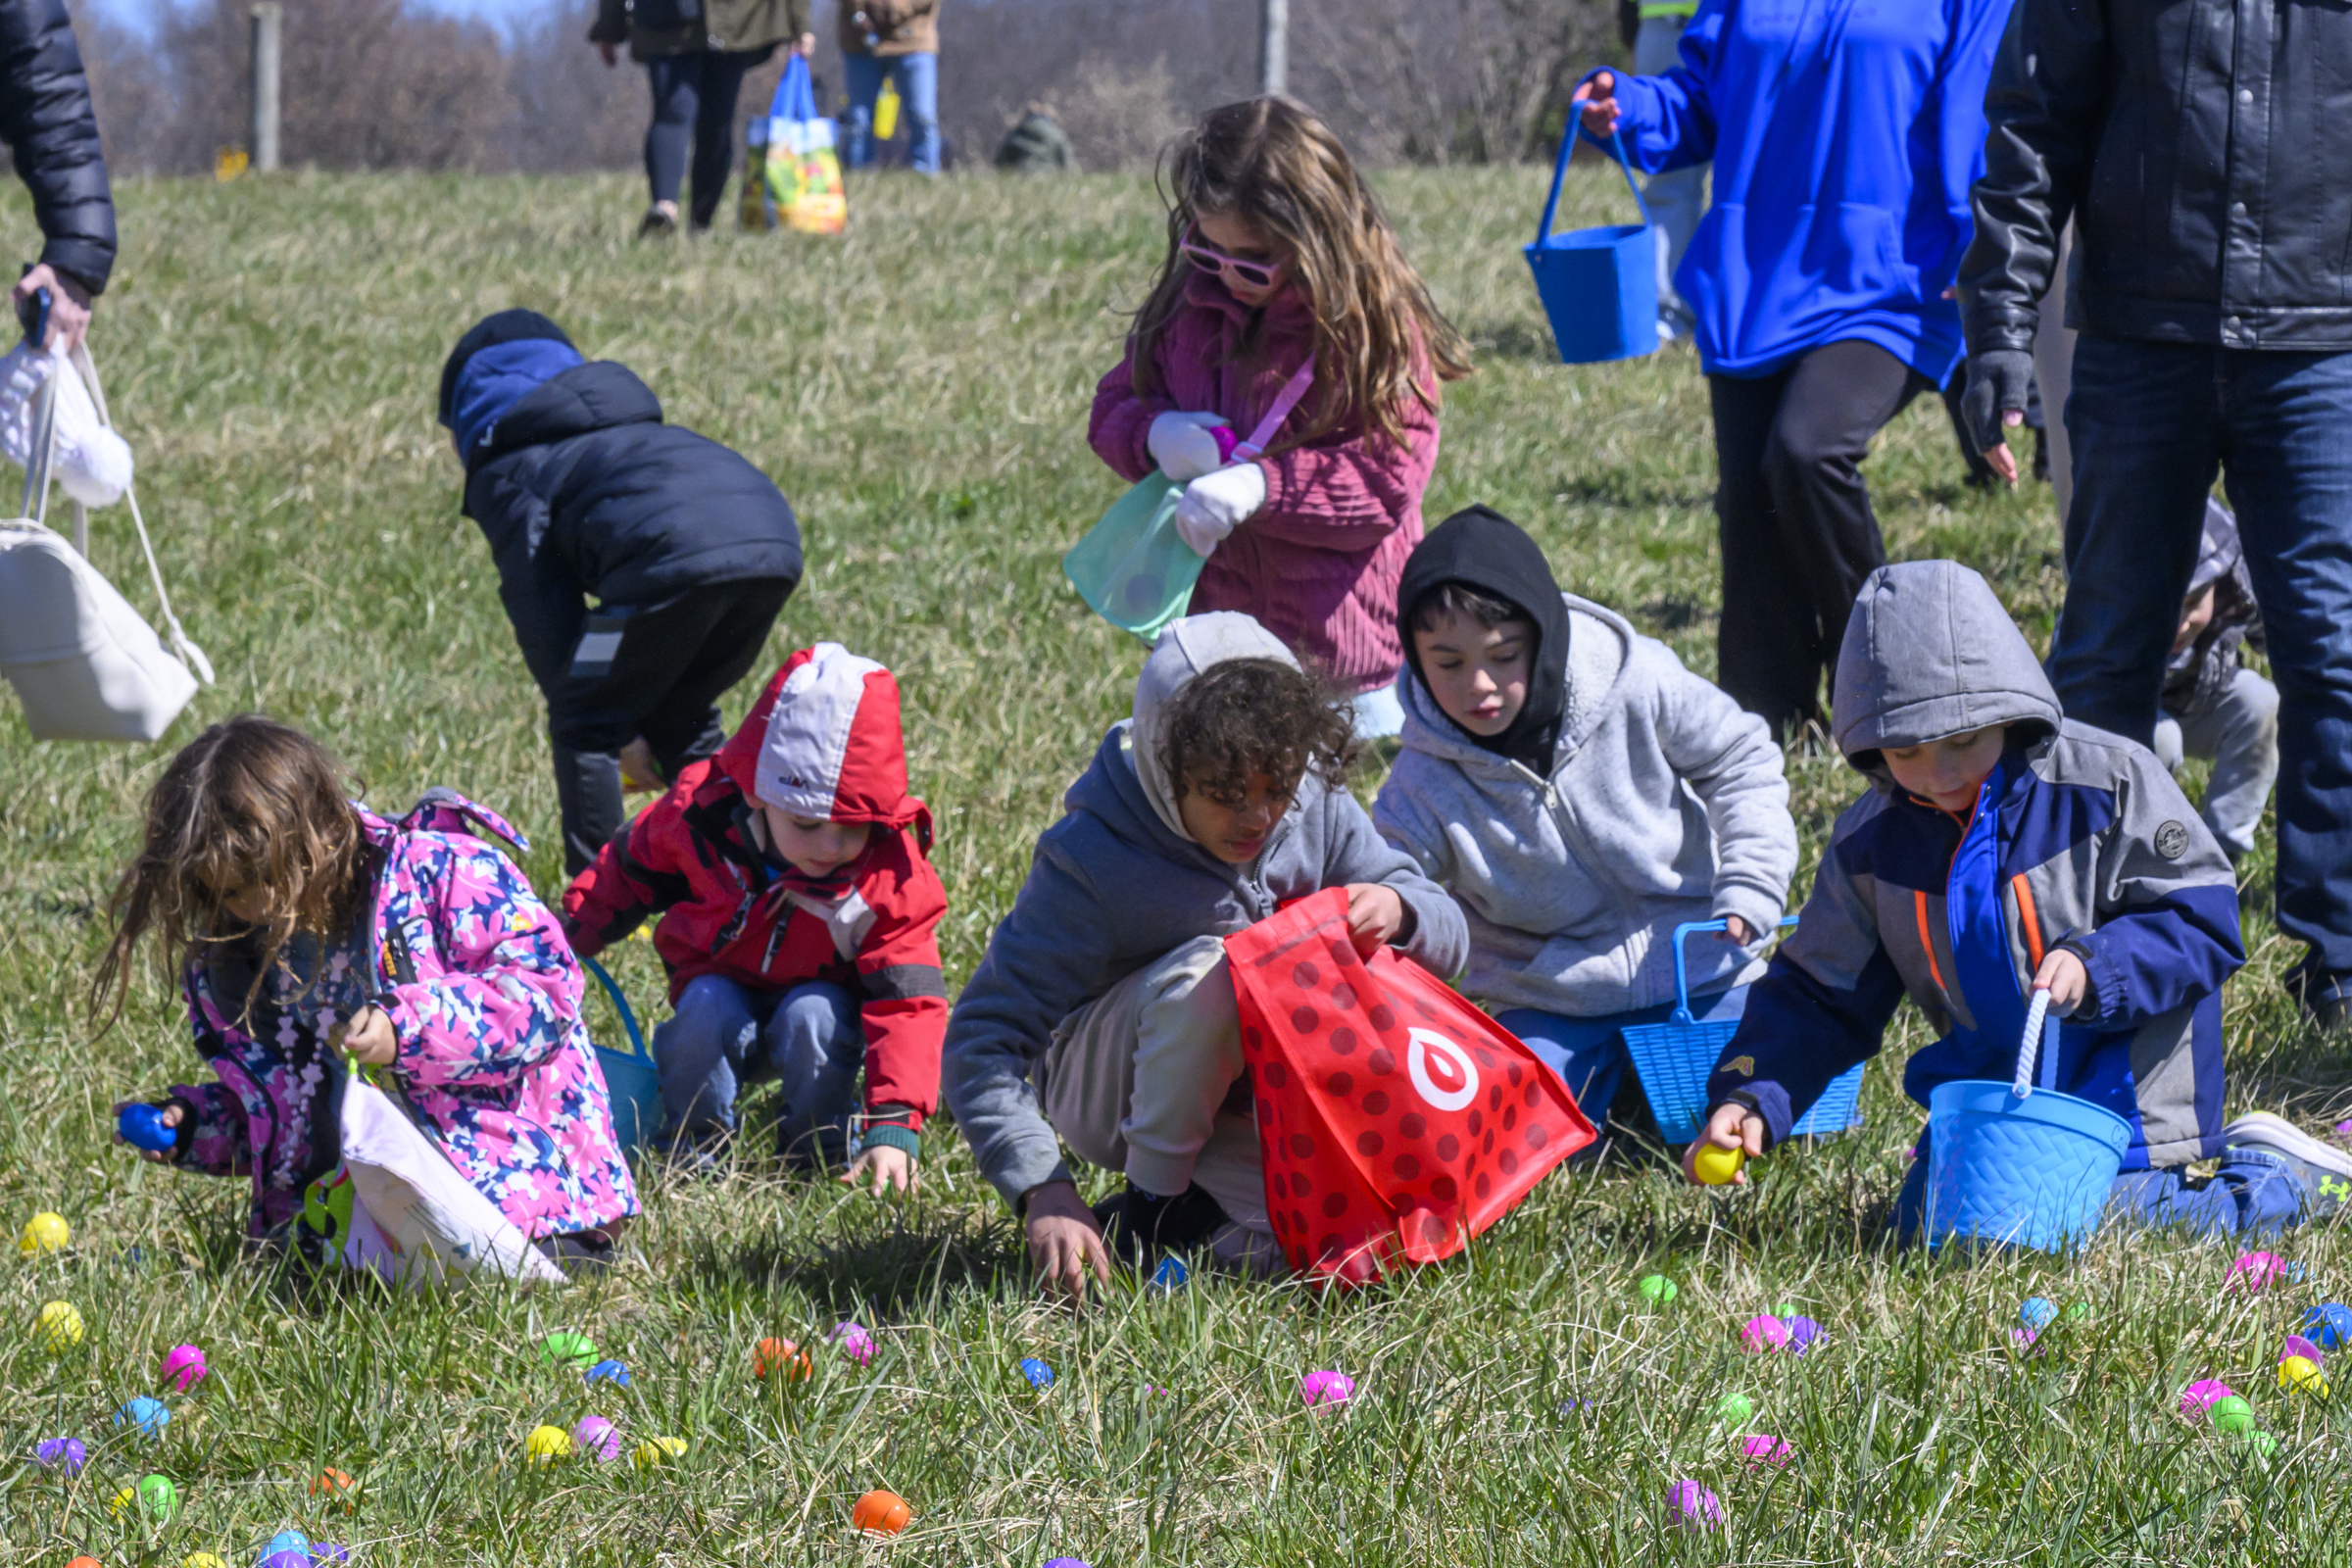 A group of children pick up Easter eggs during the Coppermine Eggstravaganza at Cascade Park in Hampstead. (Thomas Walker/Freelance)